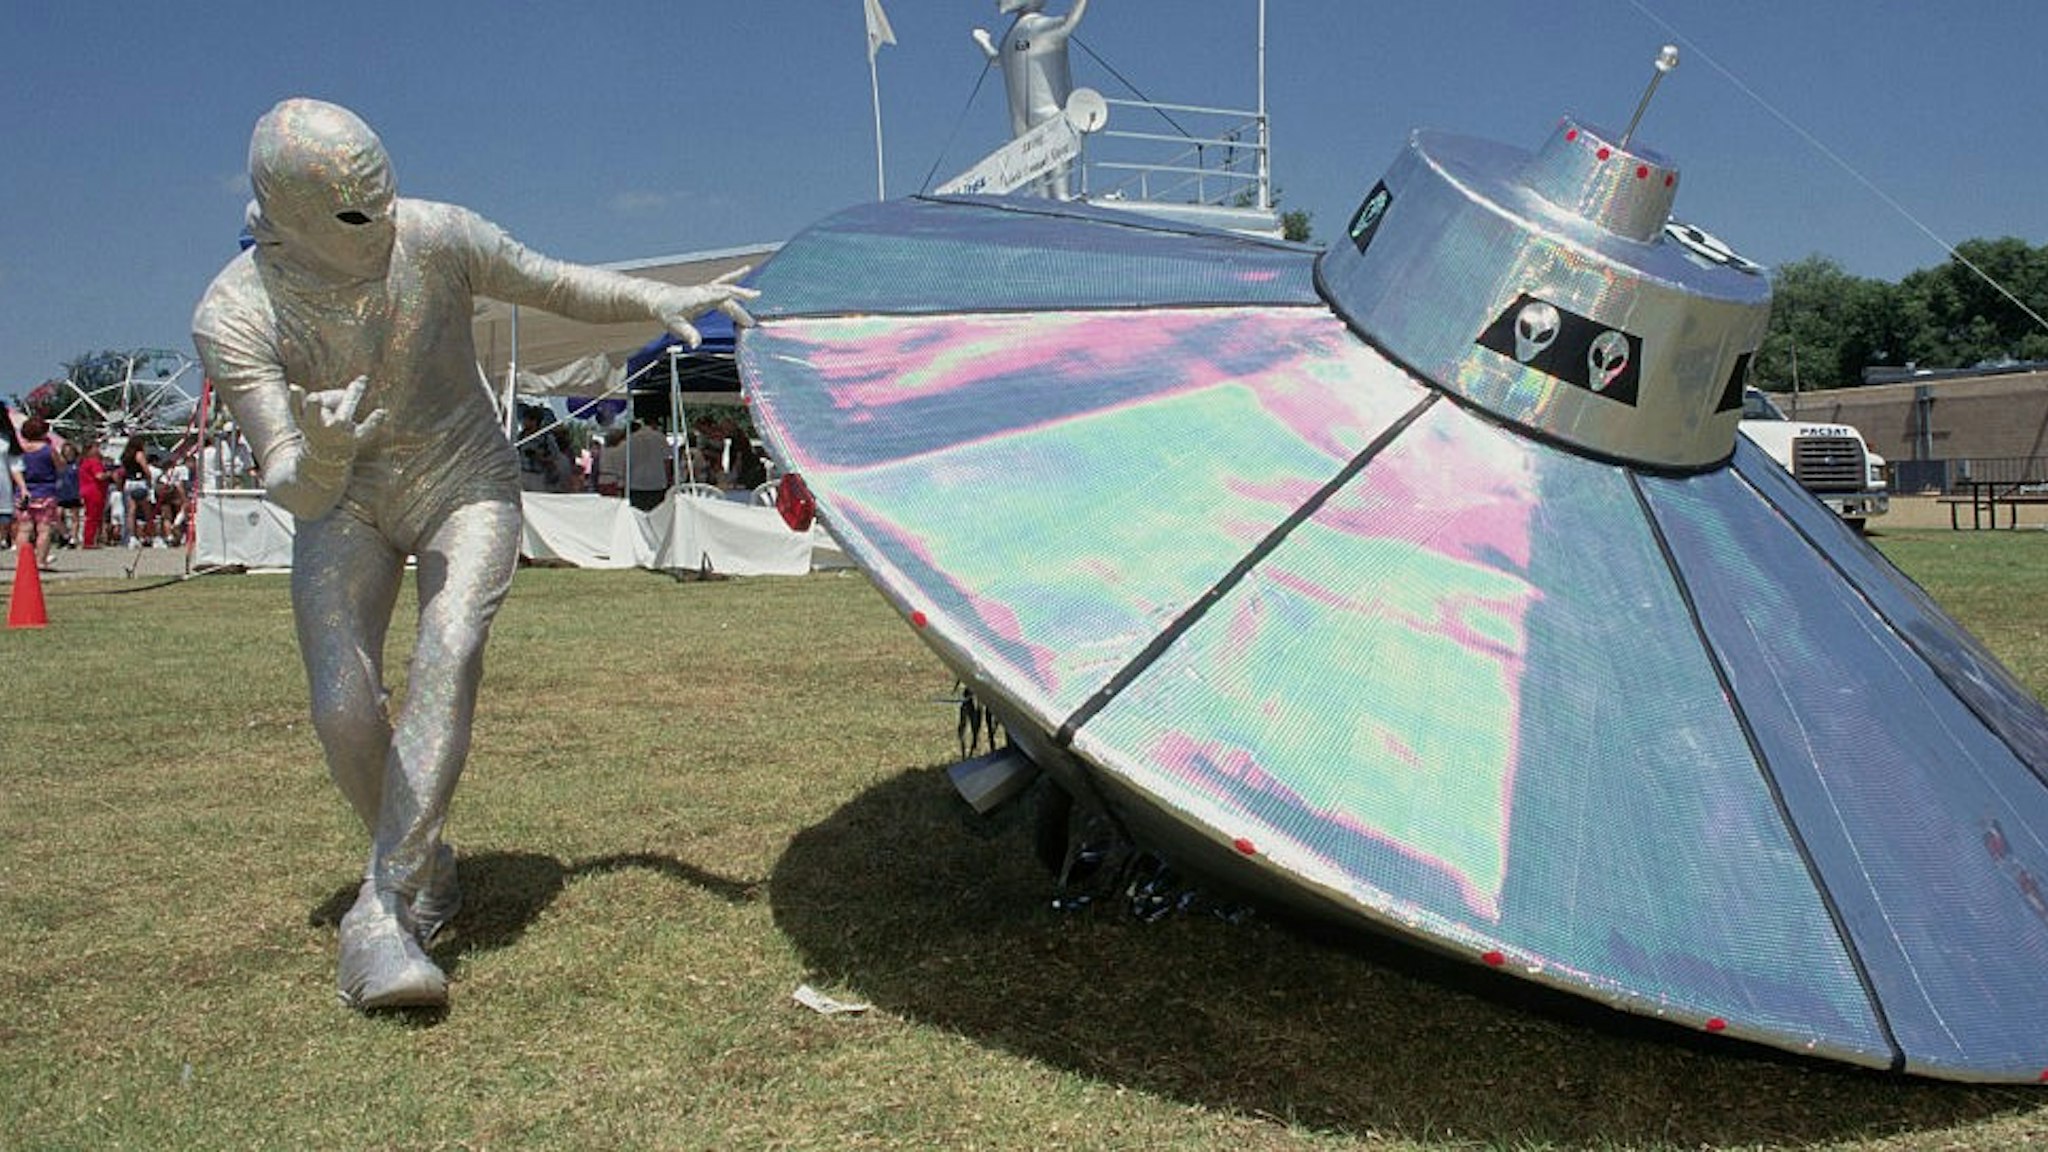 (Original Caption) Roswell, New Mexico: Crash And Burn Extravaganza Parade During UFO Expo. (Photo by